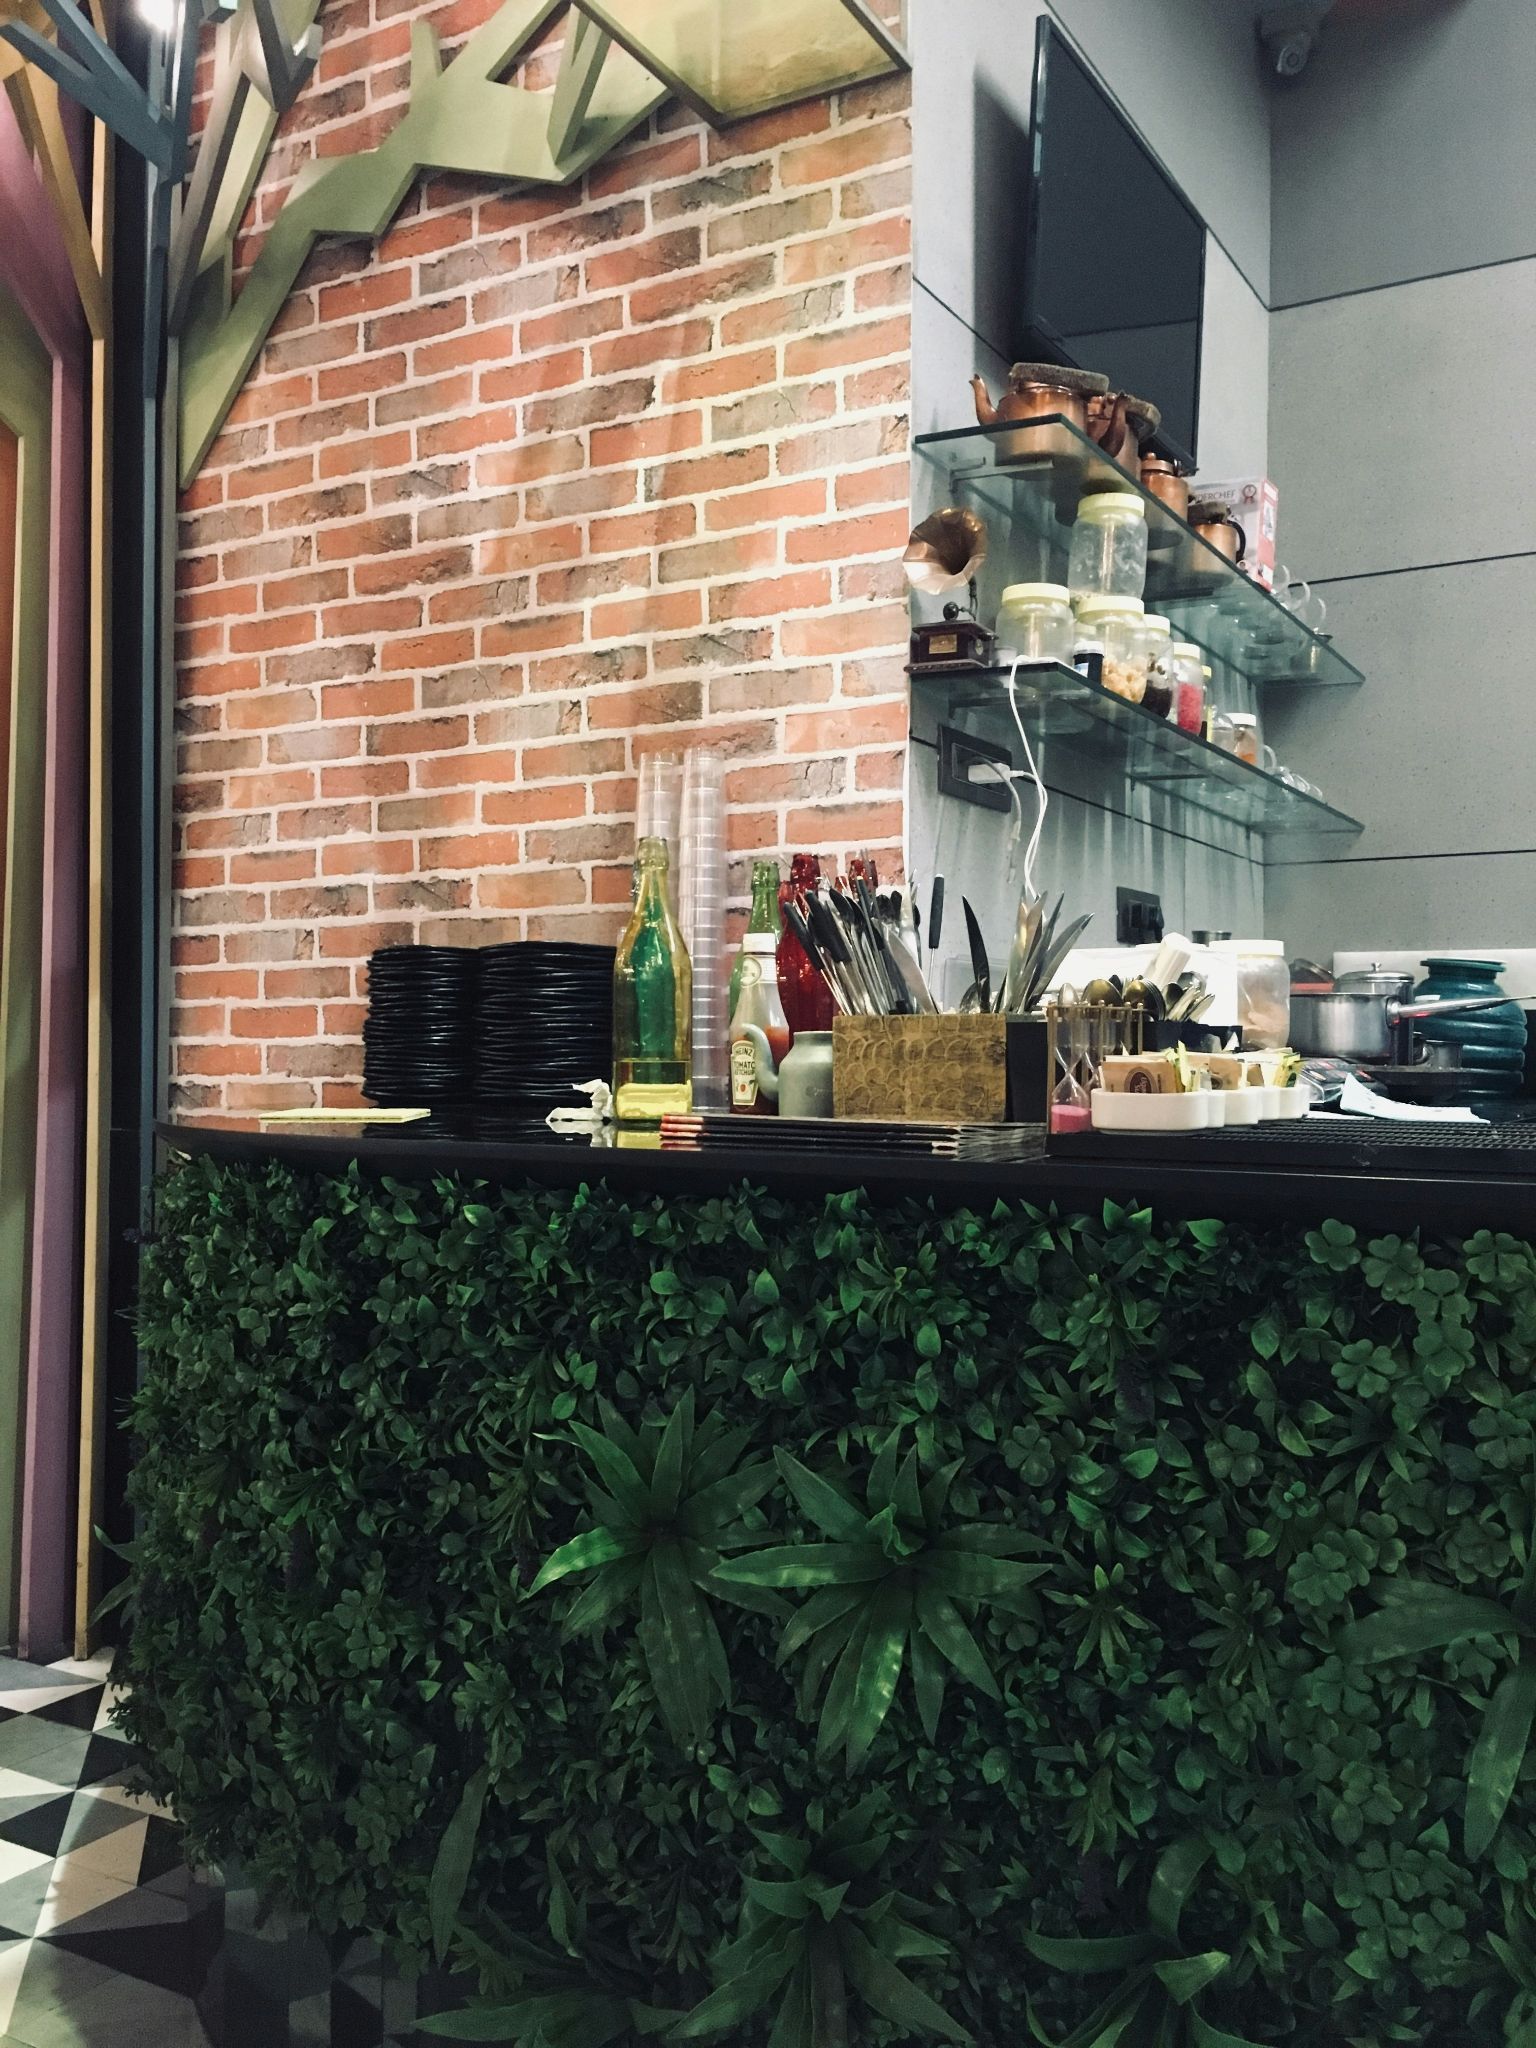 An outdoor kitchen counter full of greenery, utensils, plates and more. A TV is on the wall in the background above additional shelves.